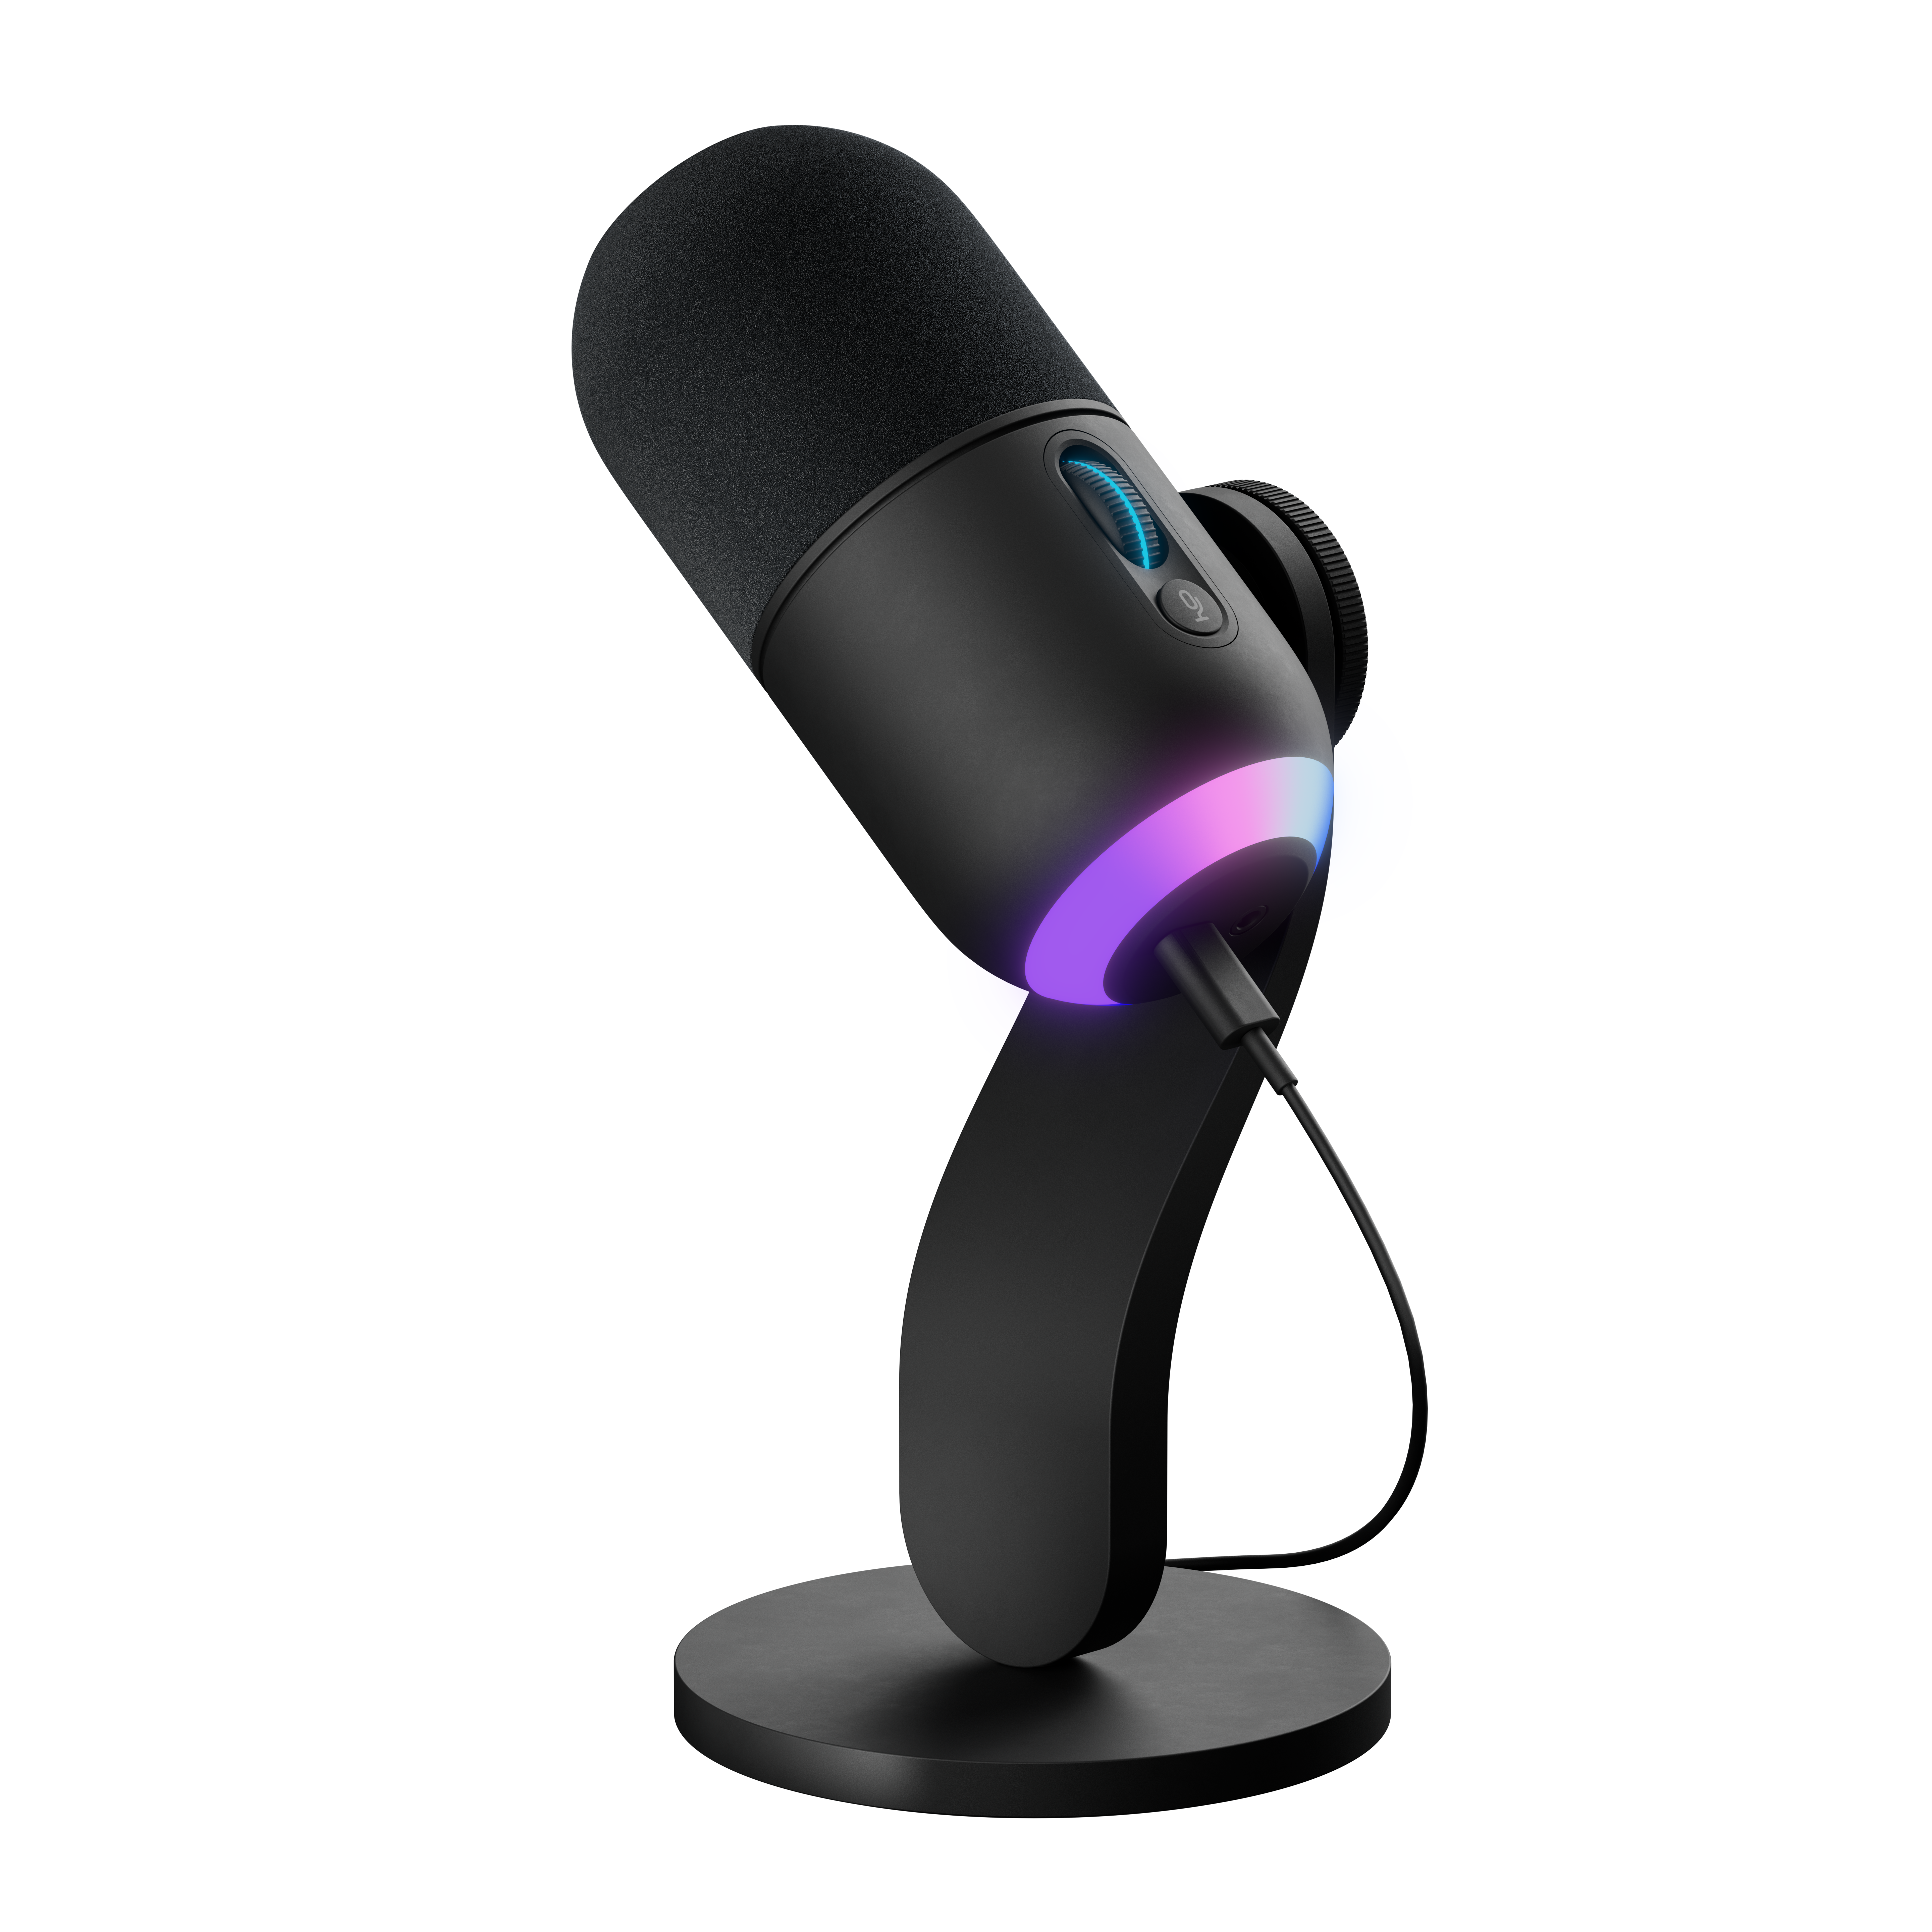 Logitech G unveil new Yeti gaming microphones and a RGB light to